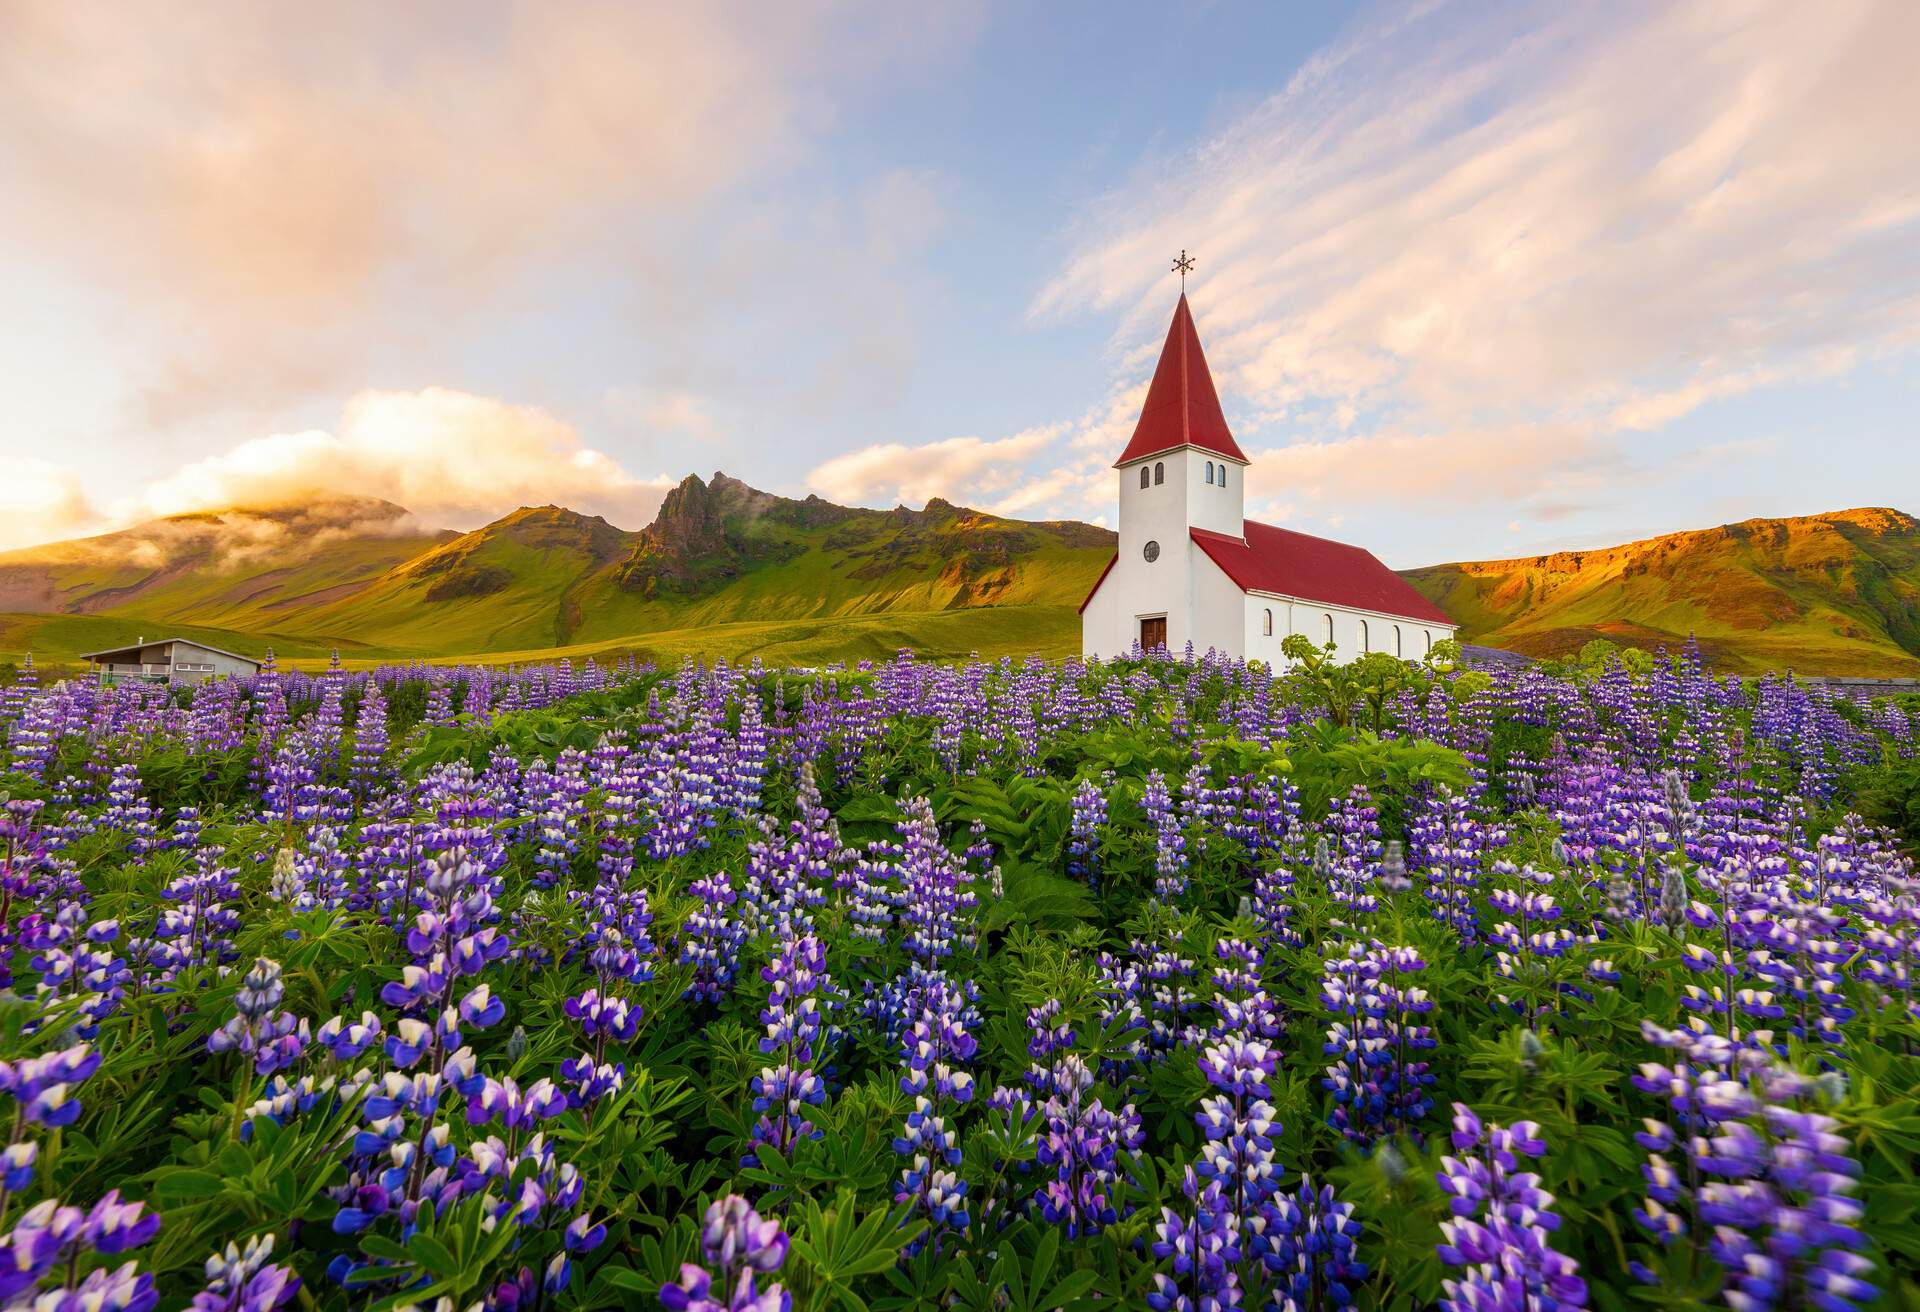 dest_iceland_vik_church_lupines_myrdal_gettyimages-1369887732_universal_within-usage-period_93577